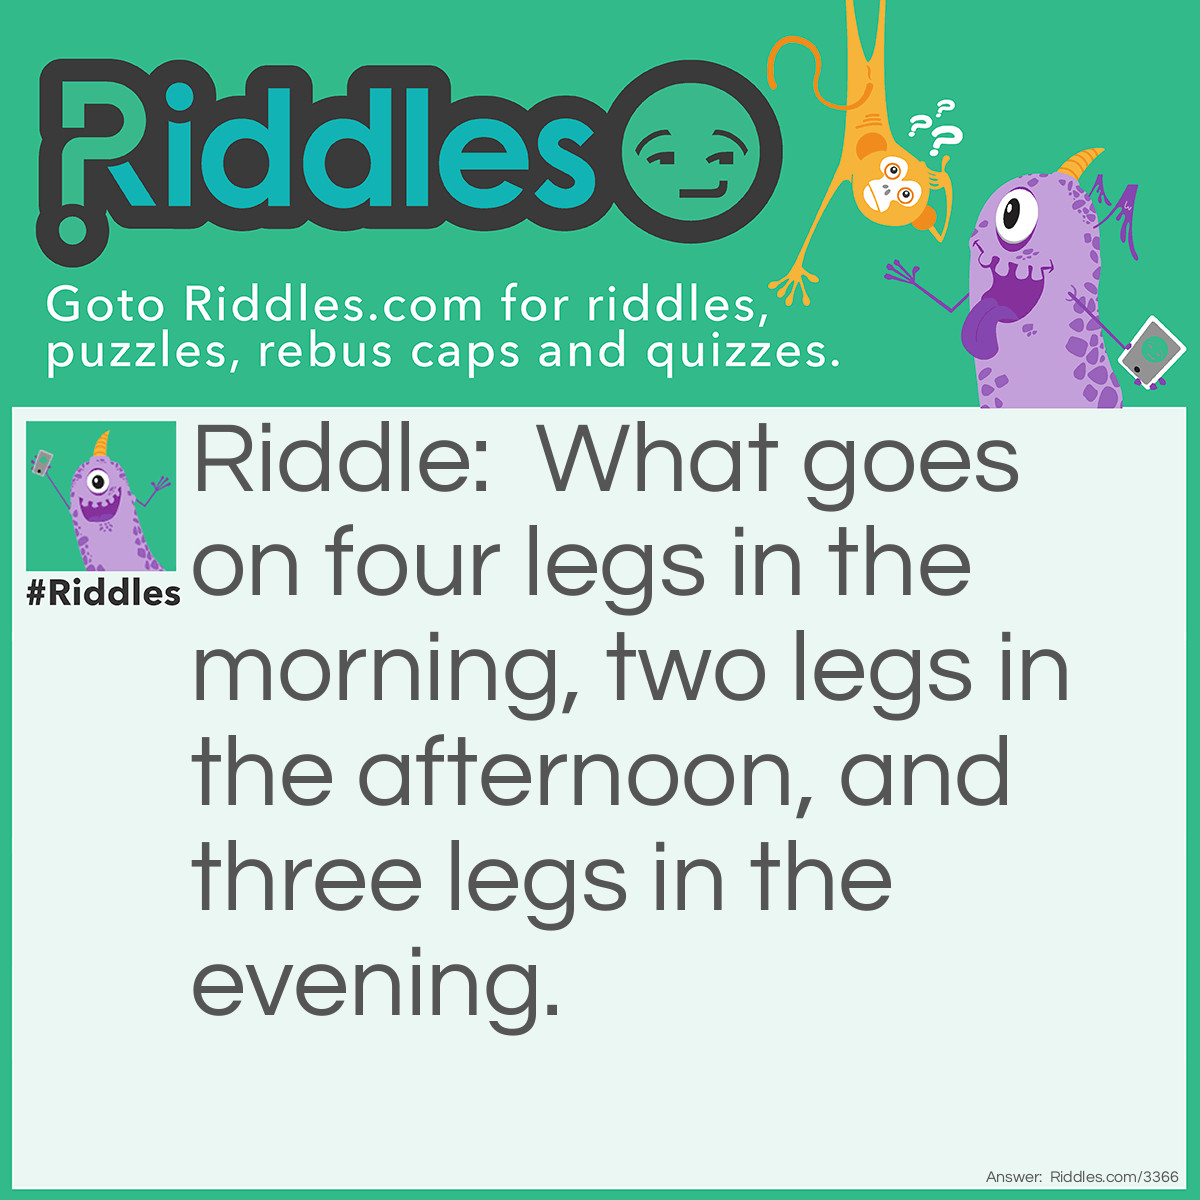 Riddle: What goes on four legs in the morning, two legs in the afternoon, and three legs in the evening. Answer: Man, who crawls as a baby, walks on two legs as an adult, and uses a walking stick in his twilight years.